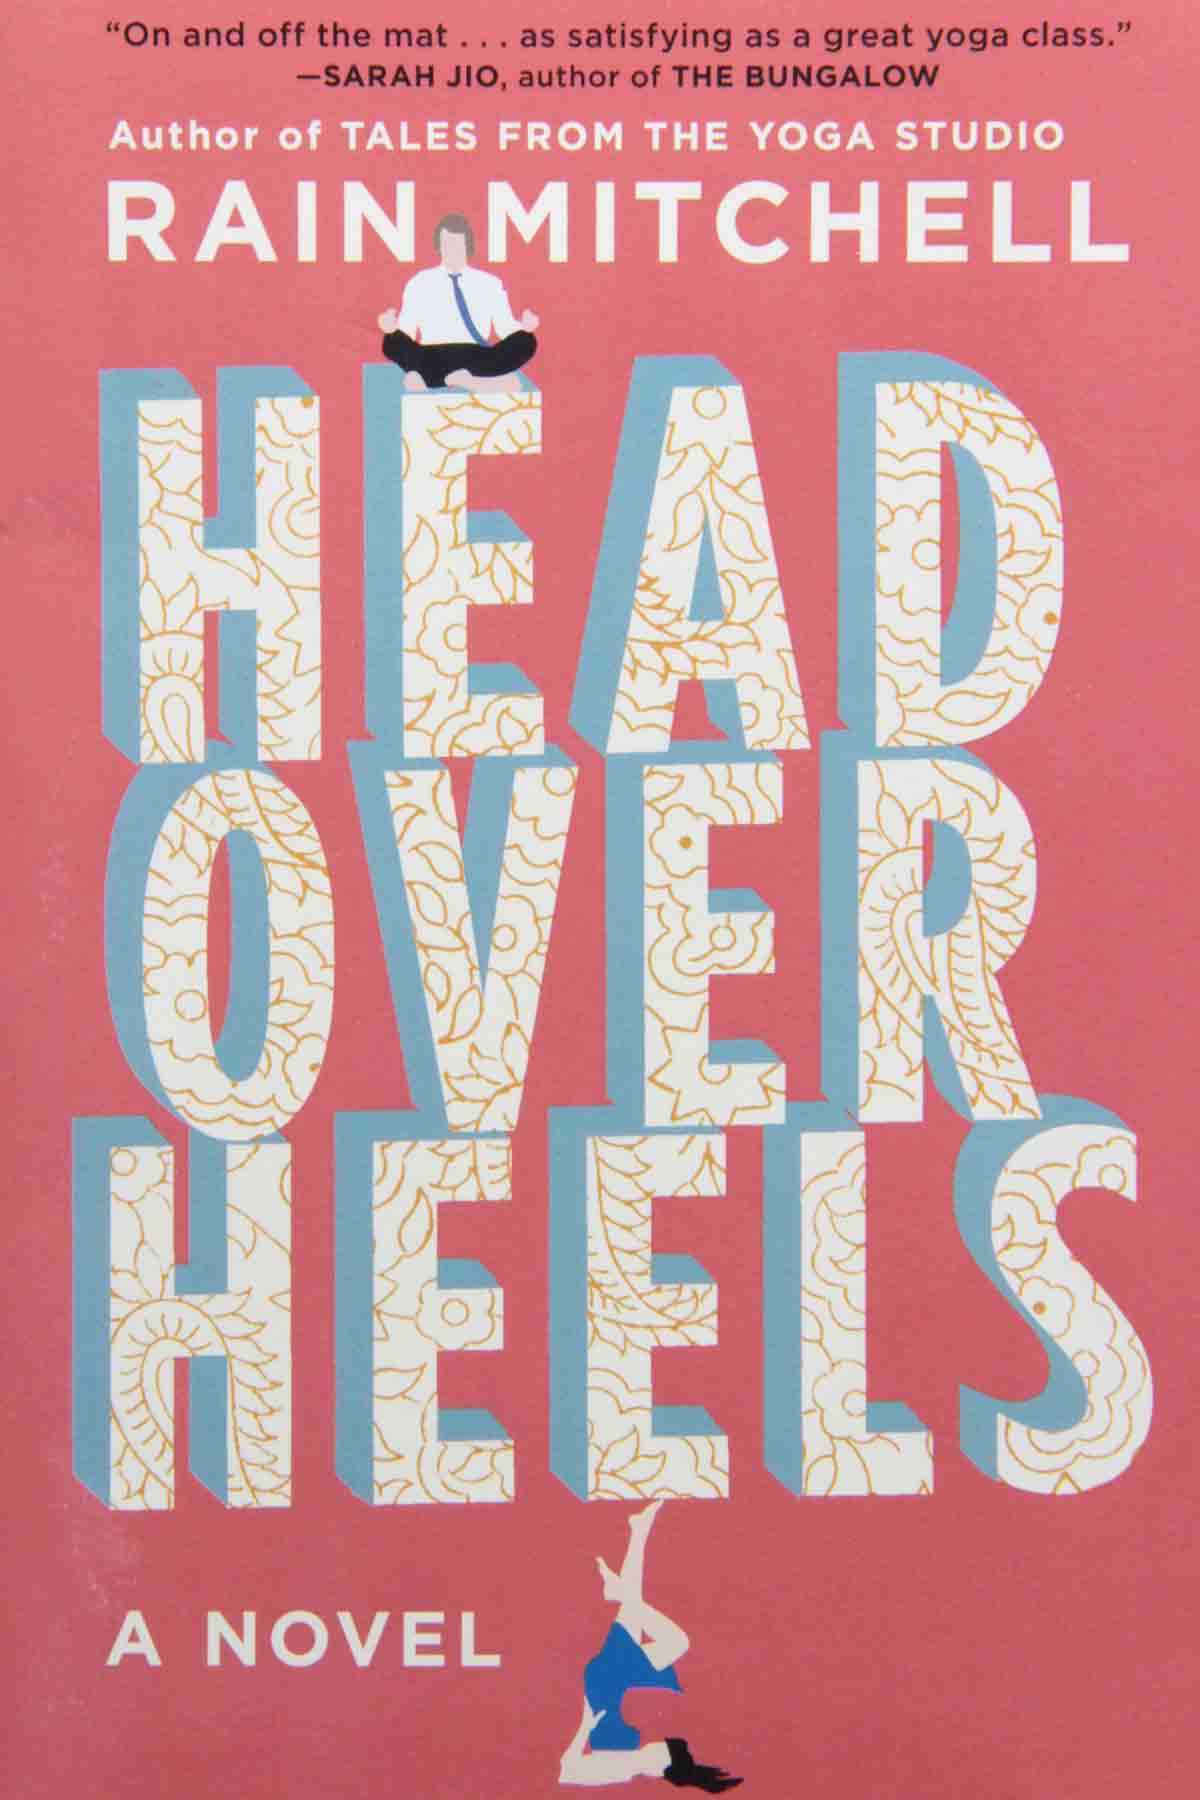 Head Over Heels •Official (@hoh4inches) • Instagram photos and videos